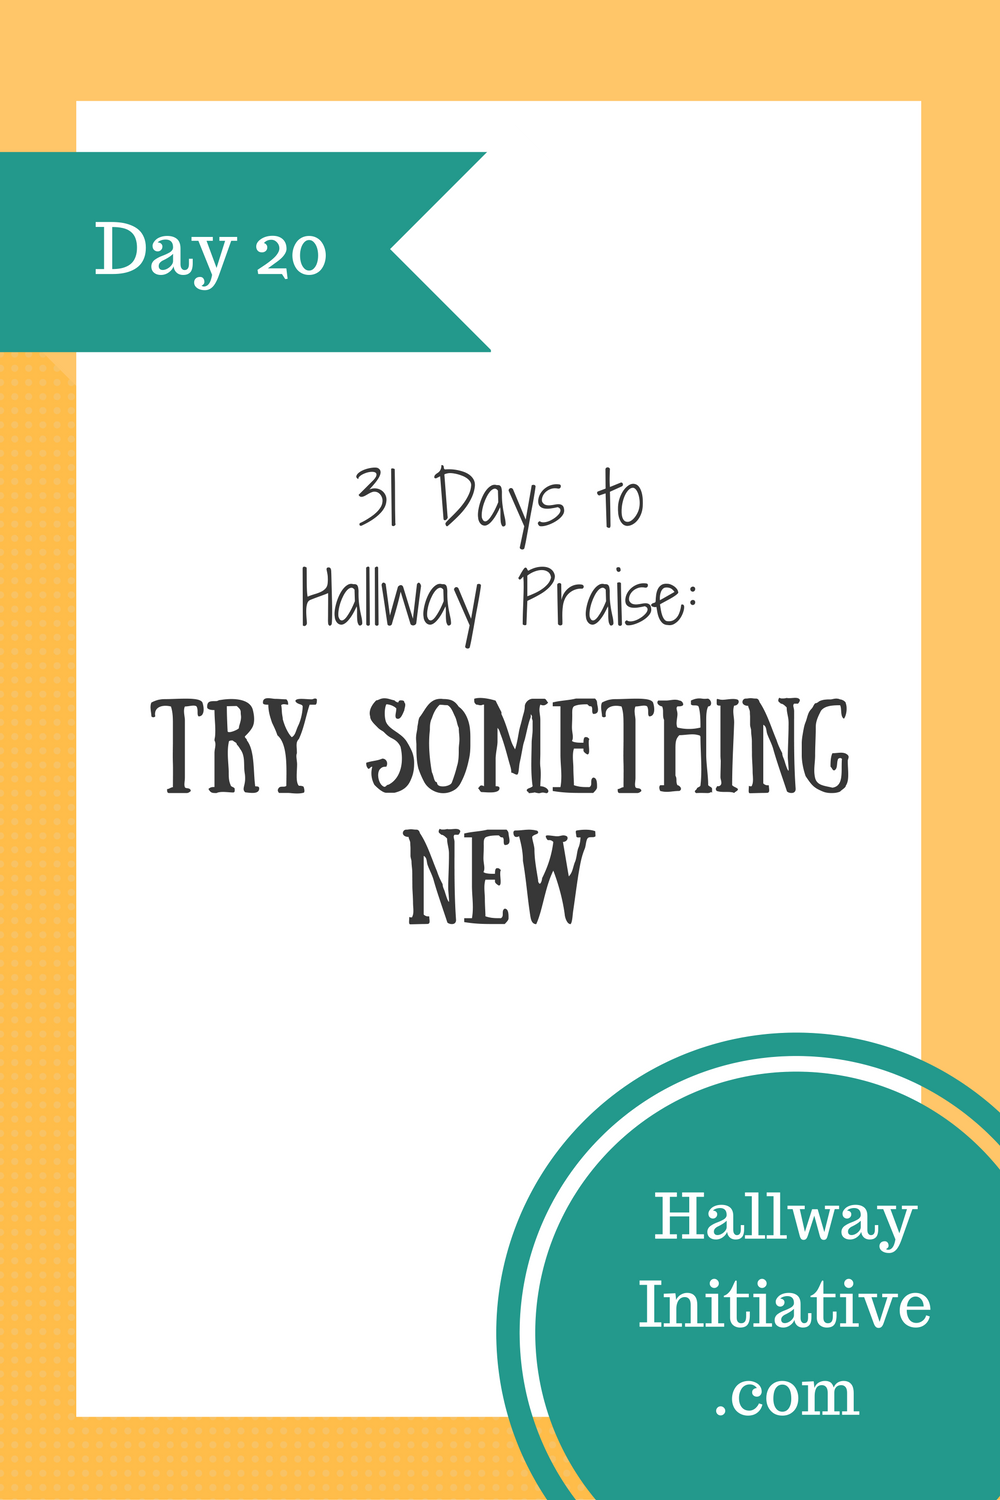 Day 20: try something new